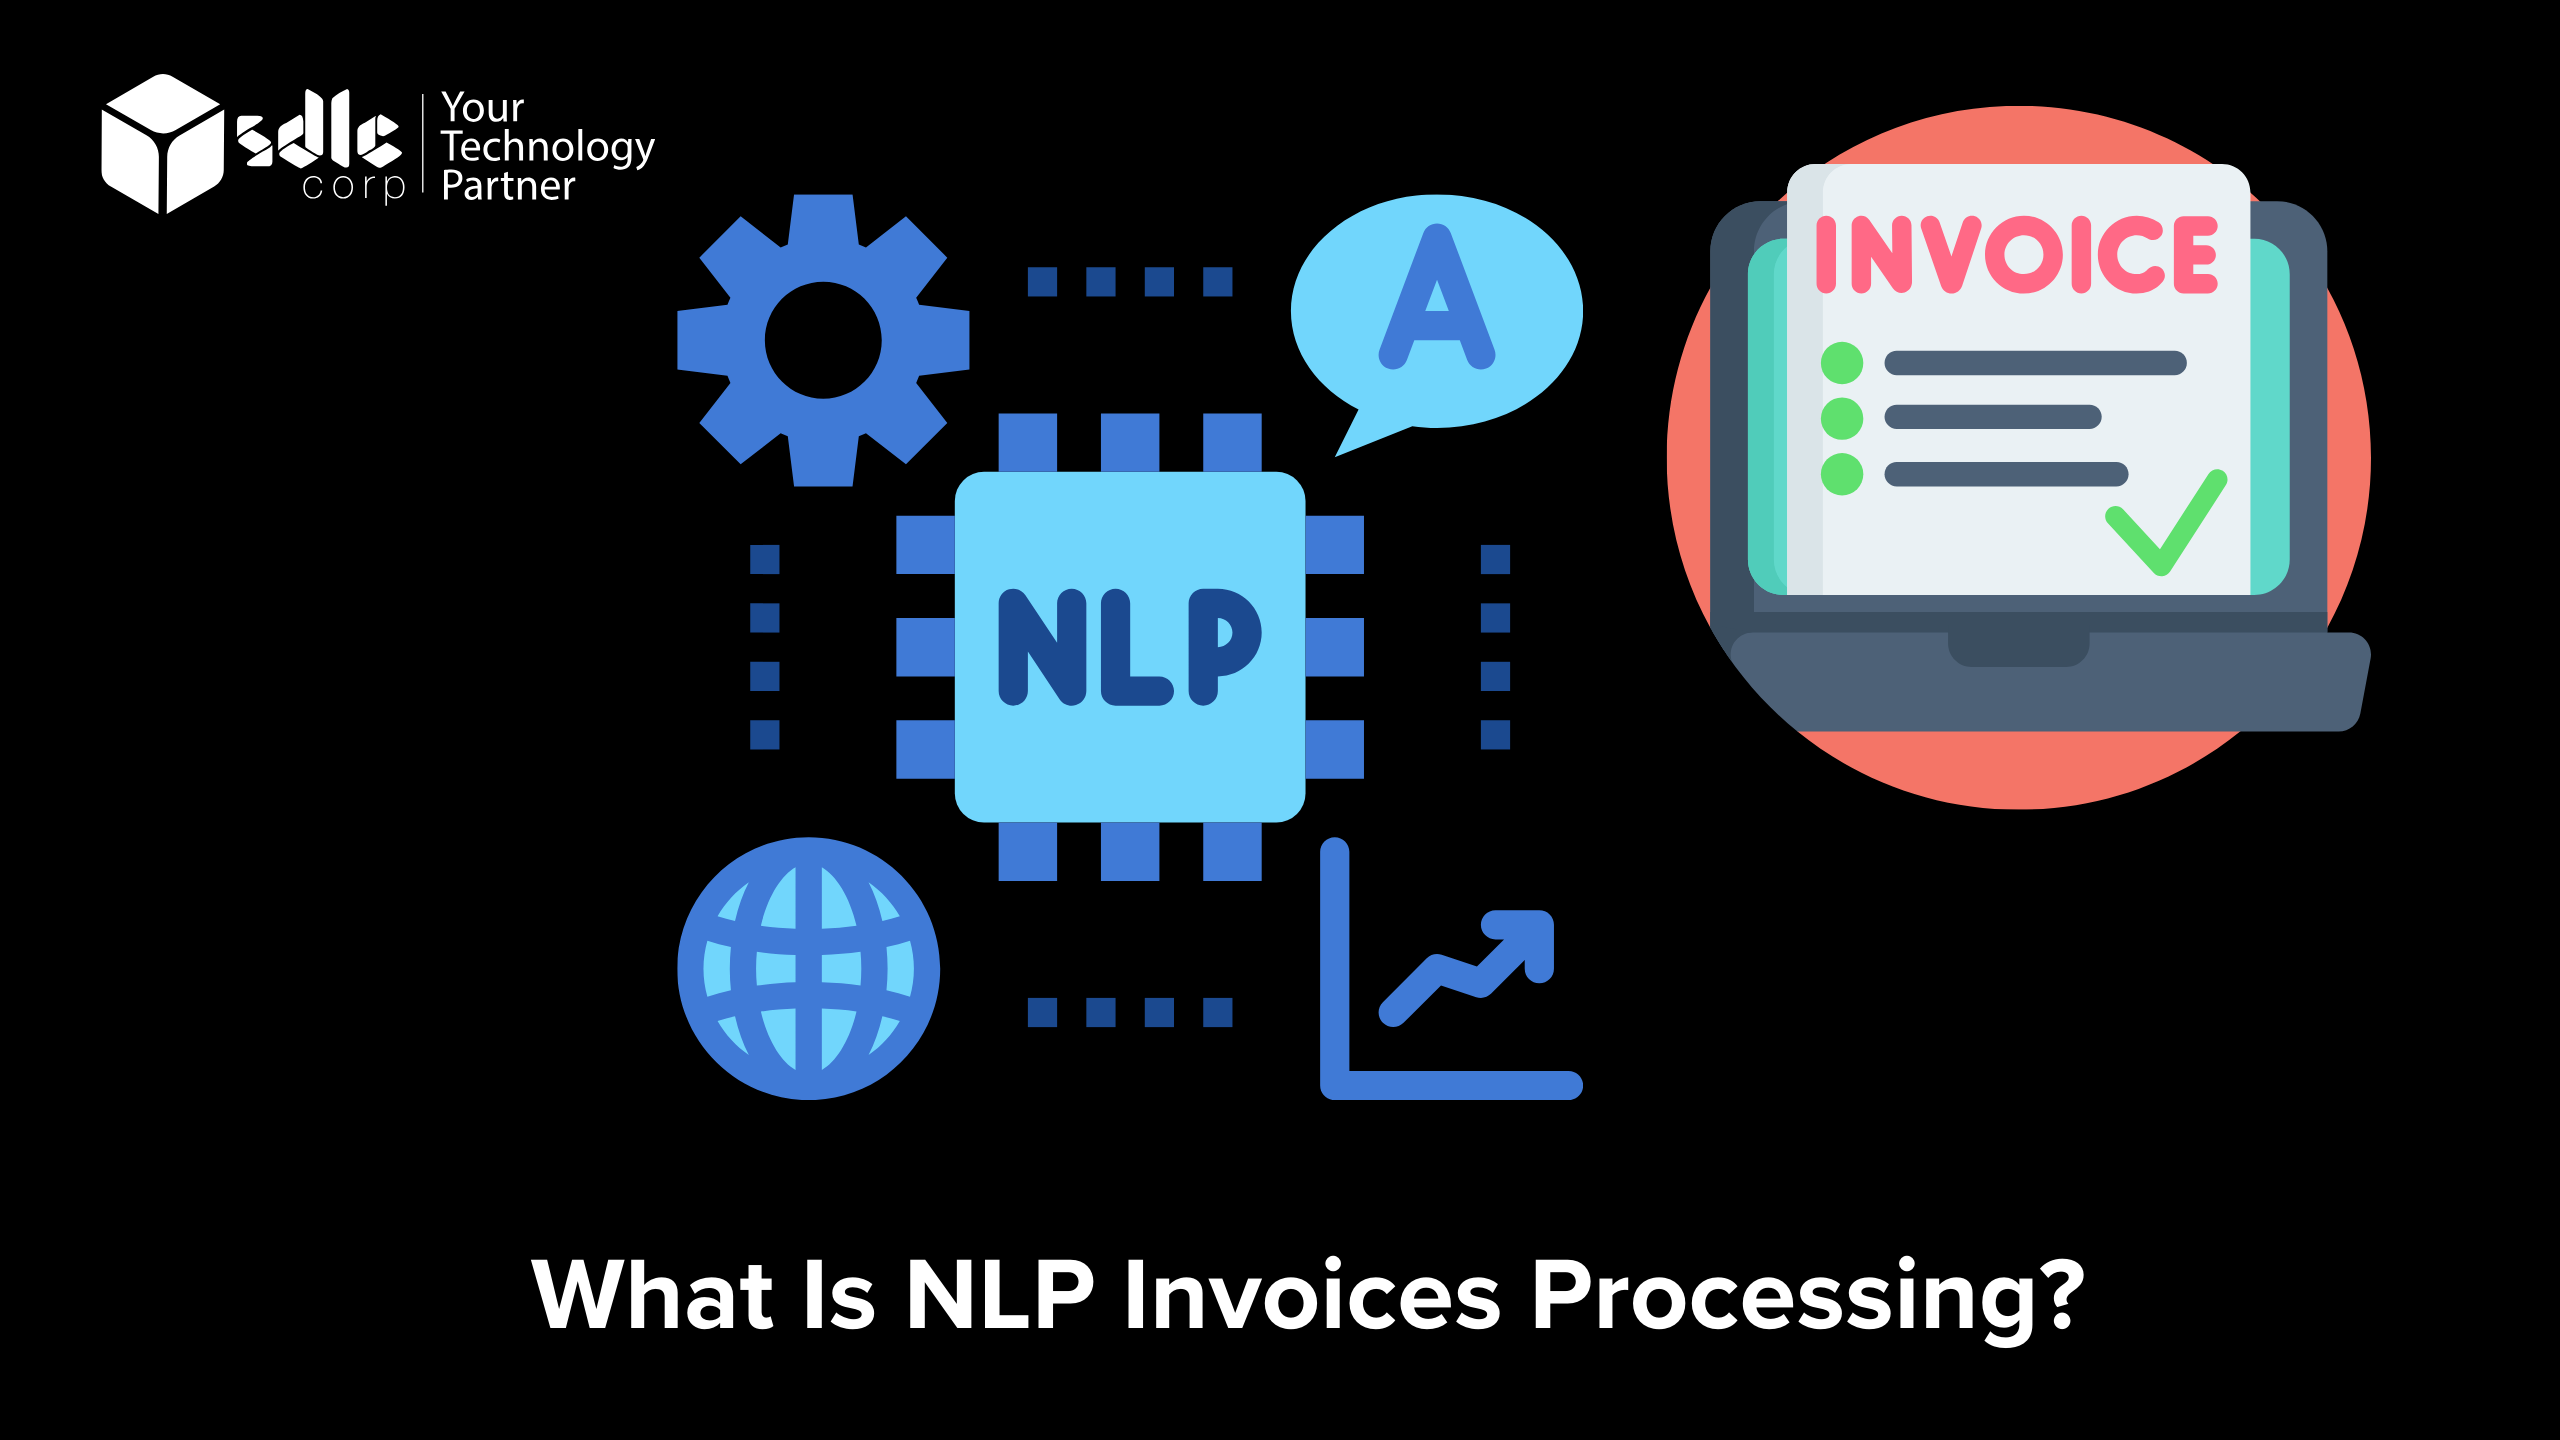 What is NLP invoices processing